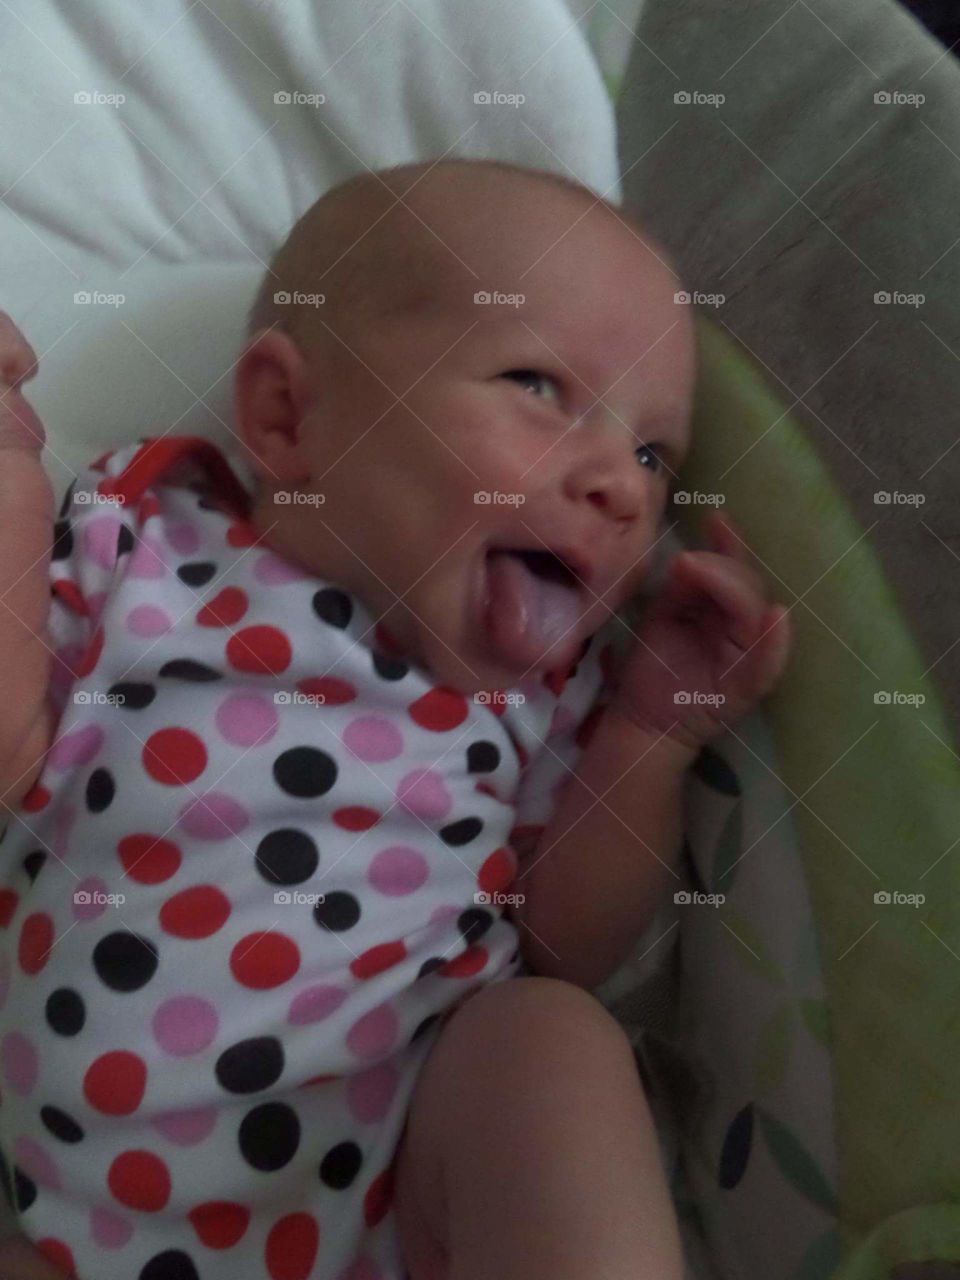 Silly baby with tongue sticking out